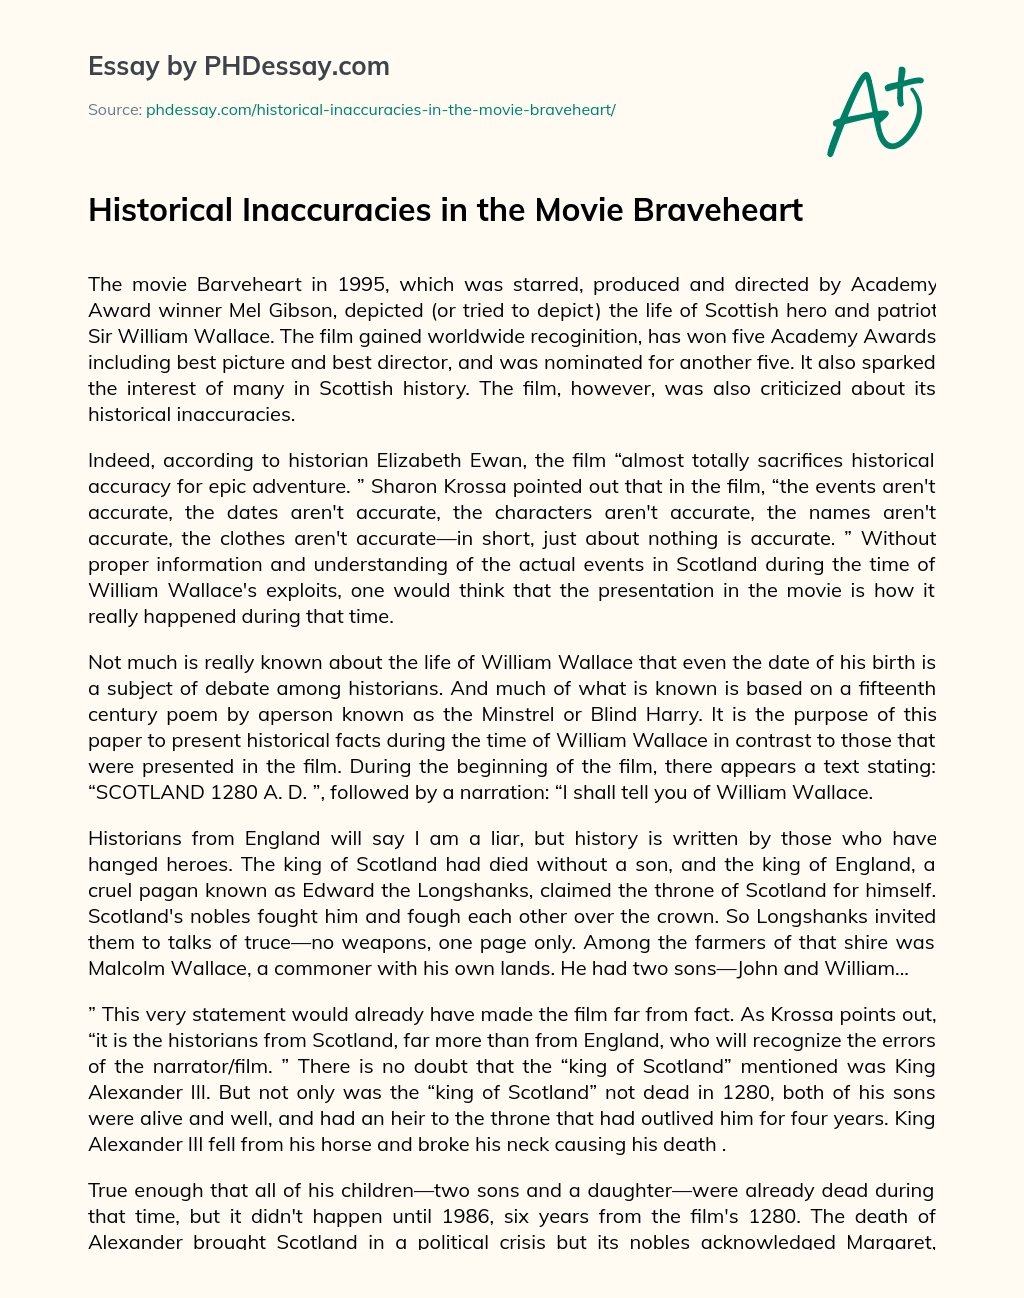 Historical Inaccuracies in the Movie Braveheart essay